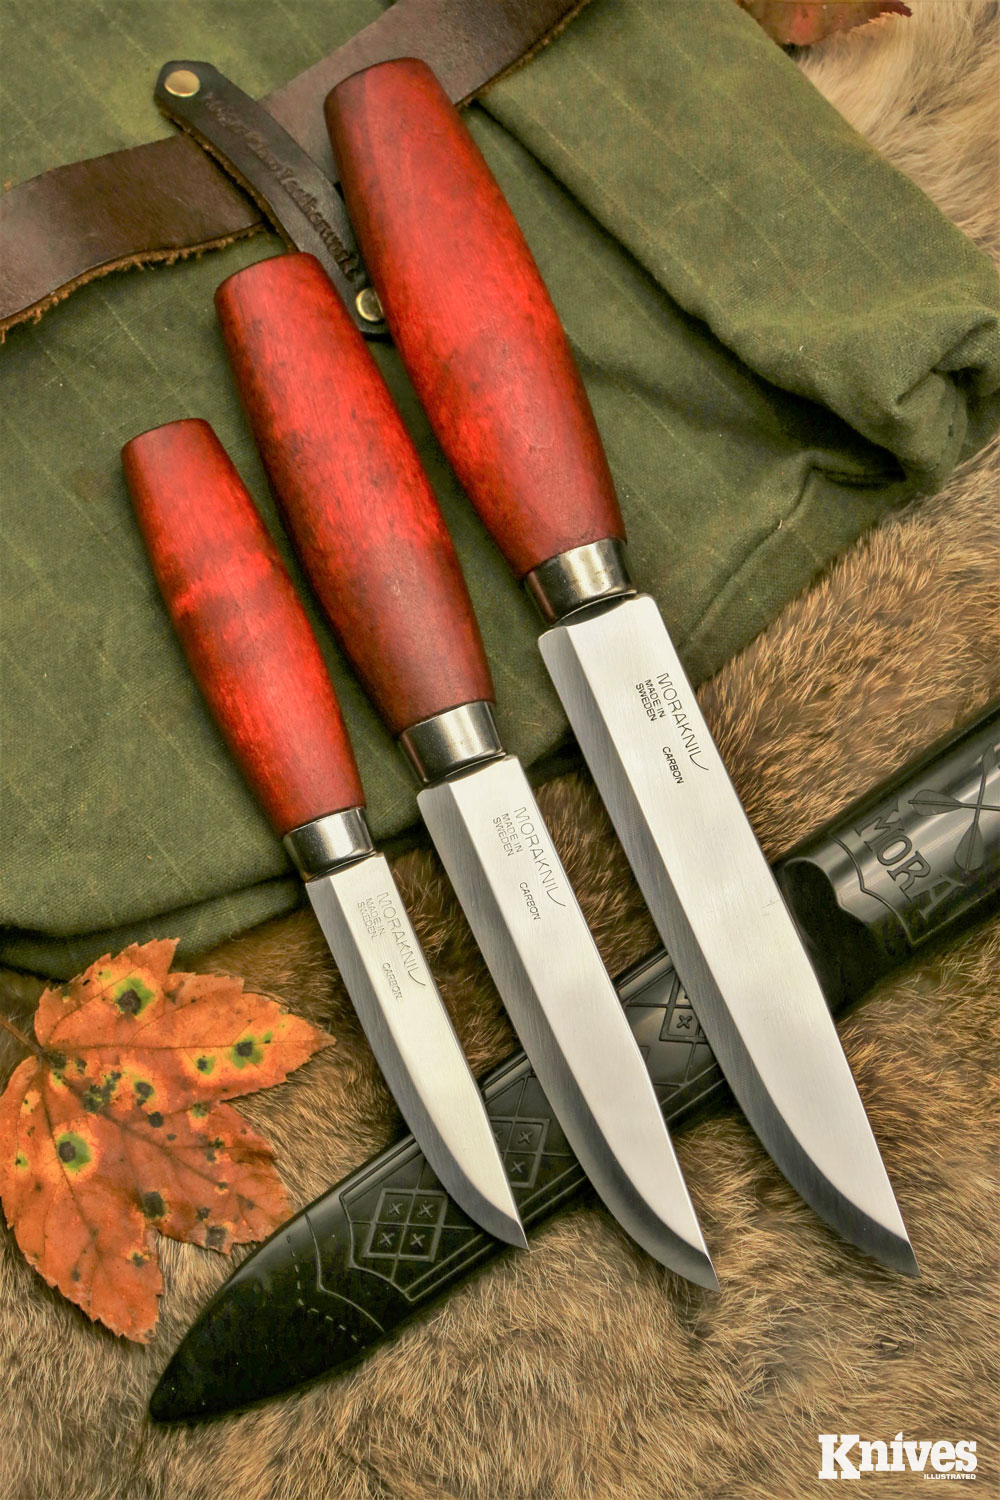 REVIEW: The new updated MORAKNIV CLASSICS, the timeless bushcraft knives -  Knives Illustrated